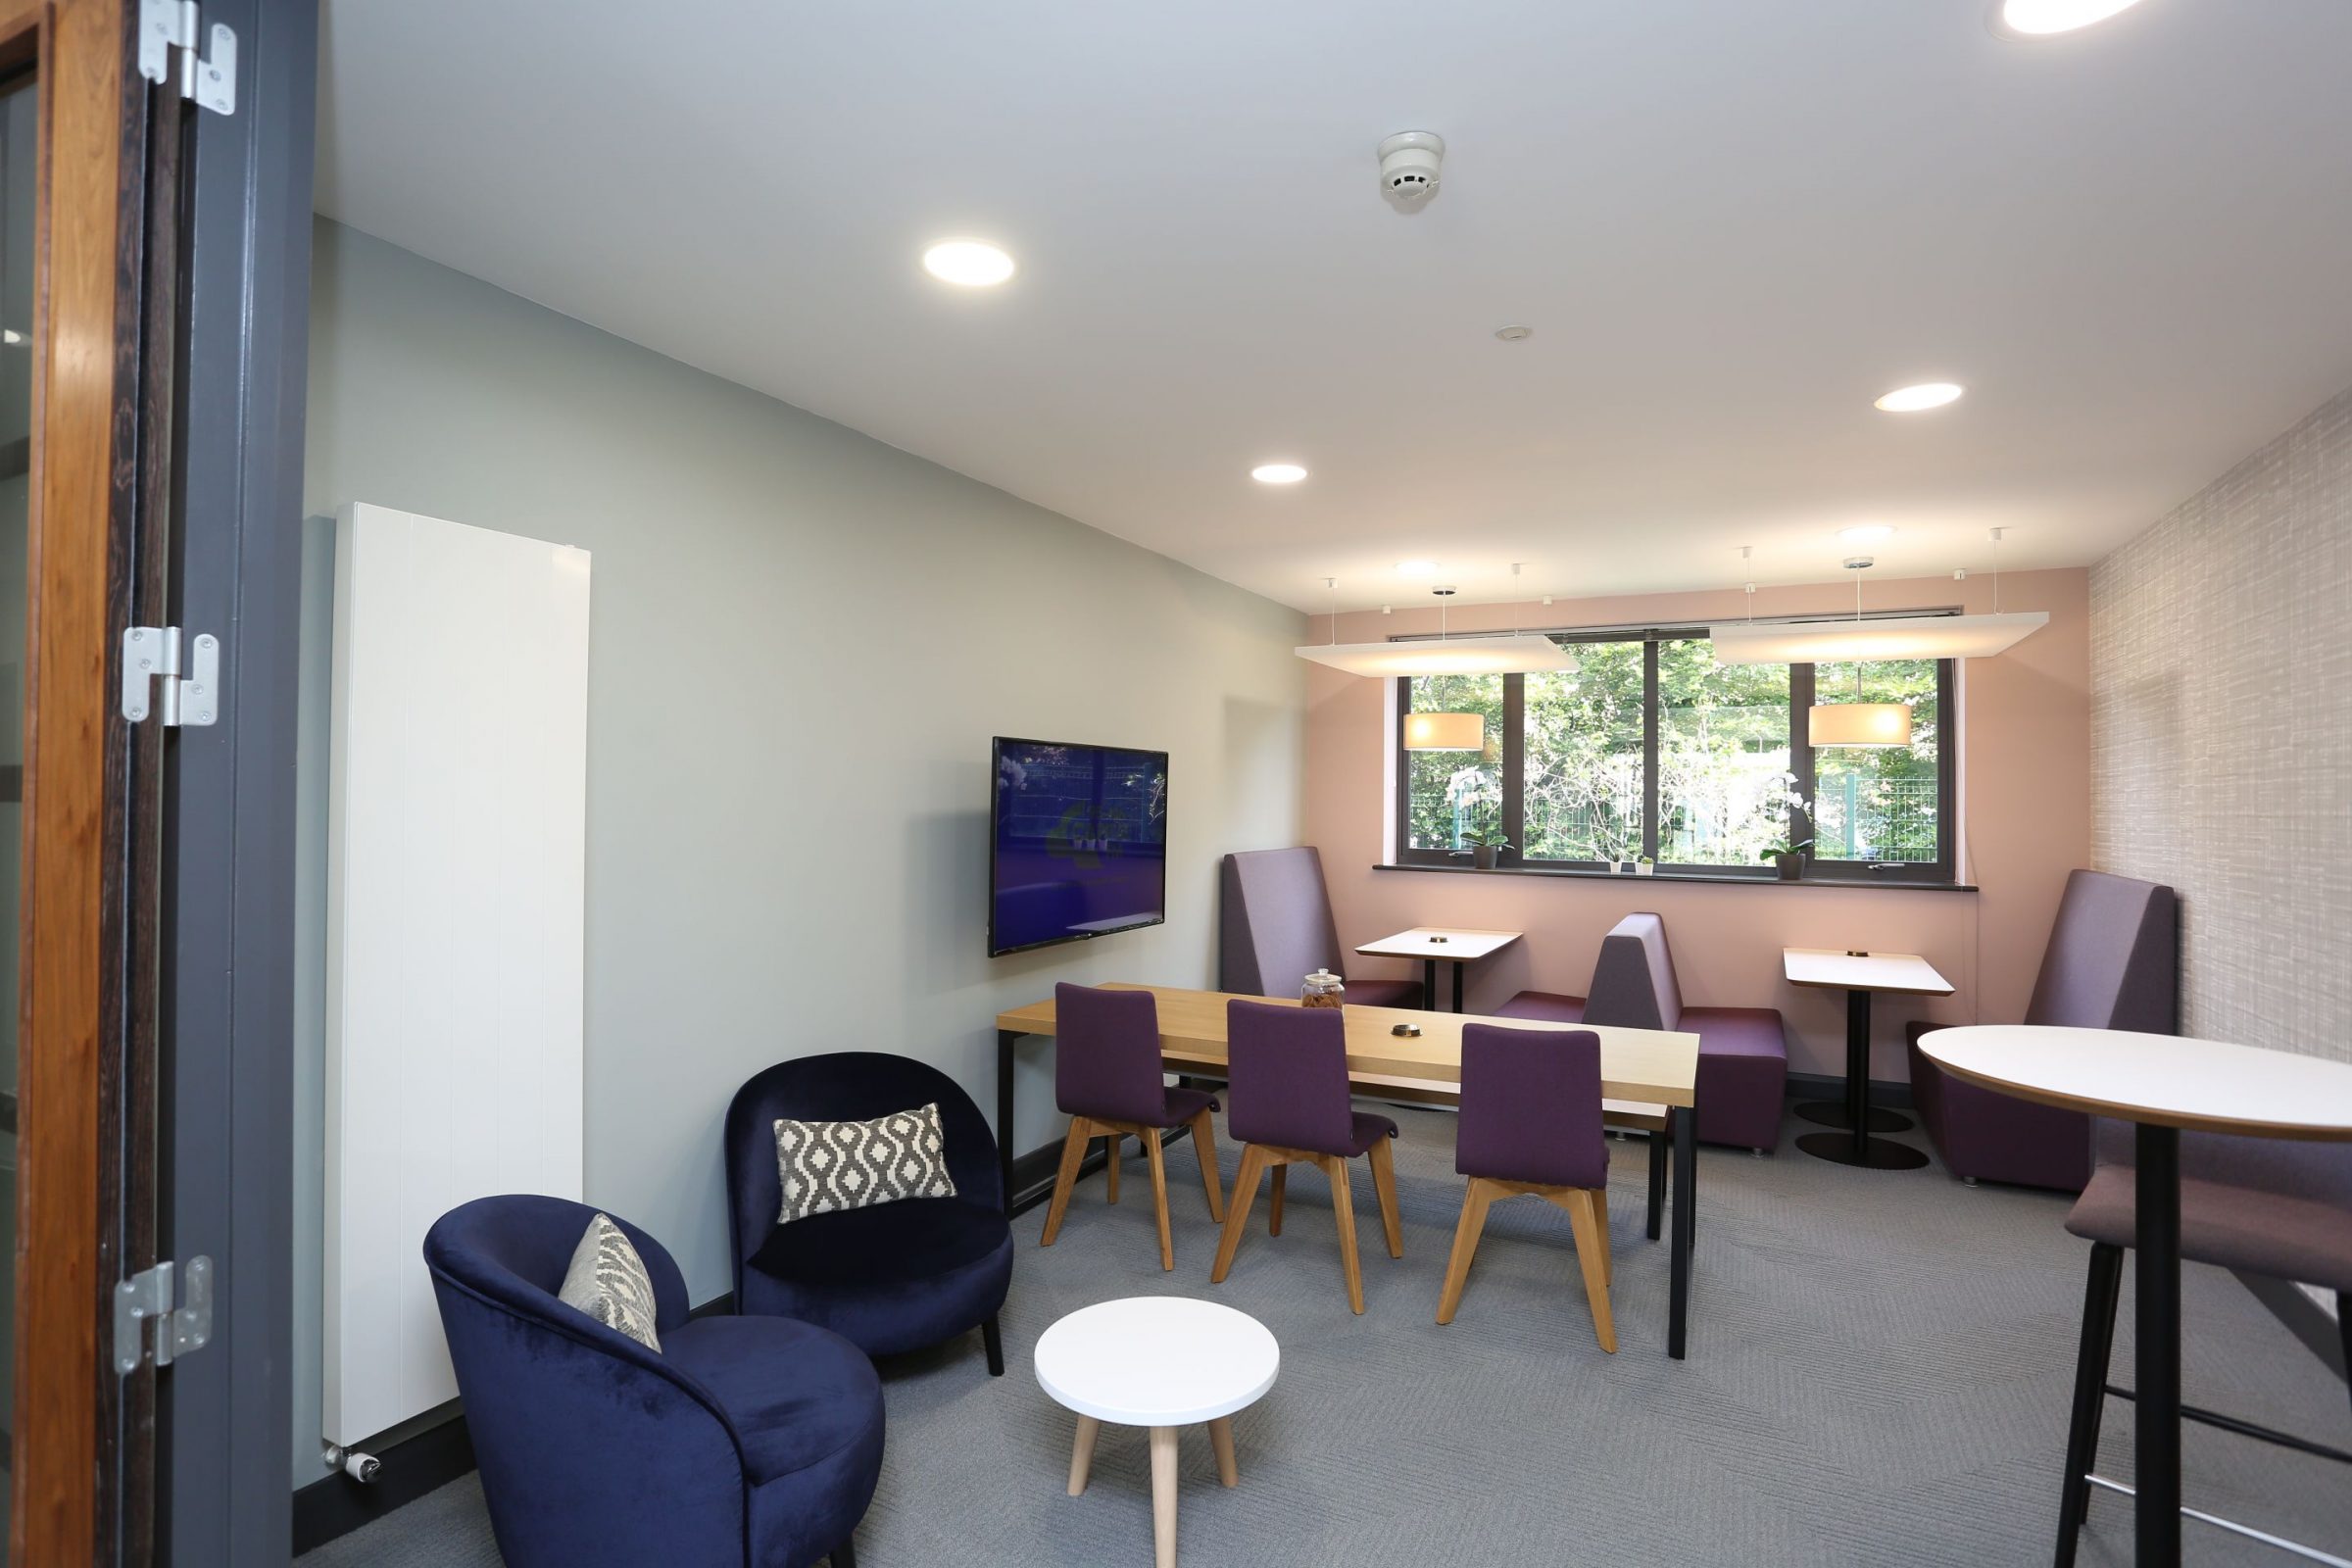 Workspace to let in Cheltenham,Gloucestershire